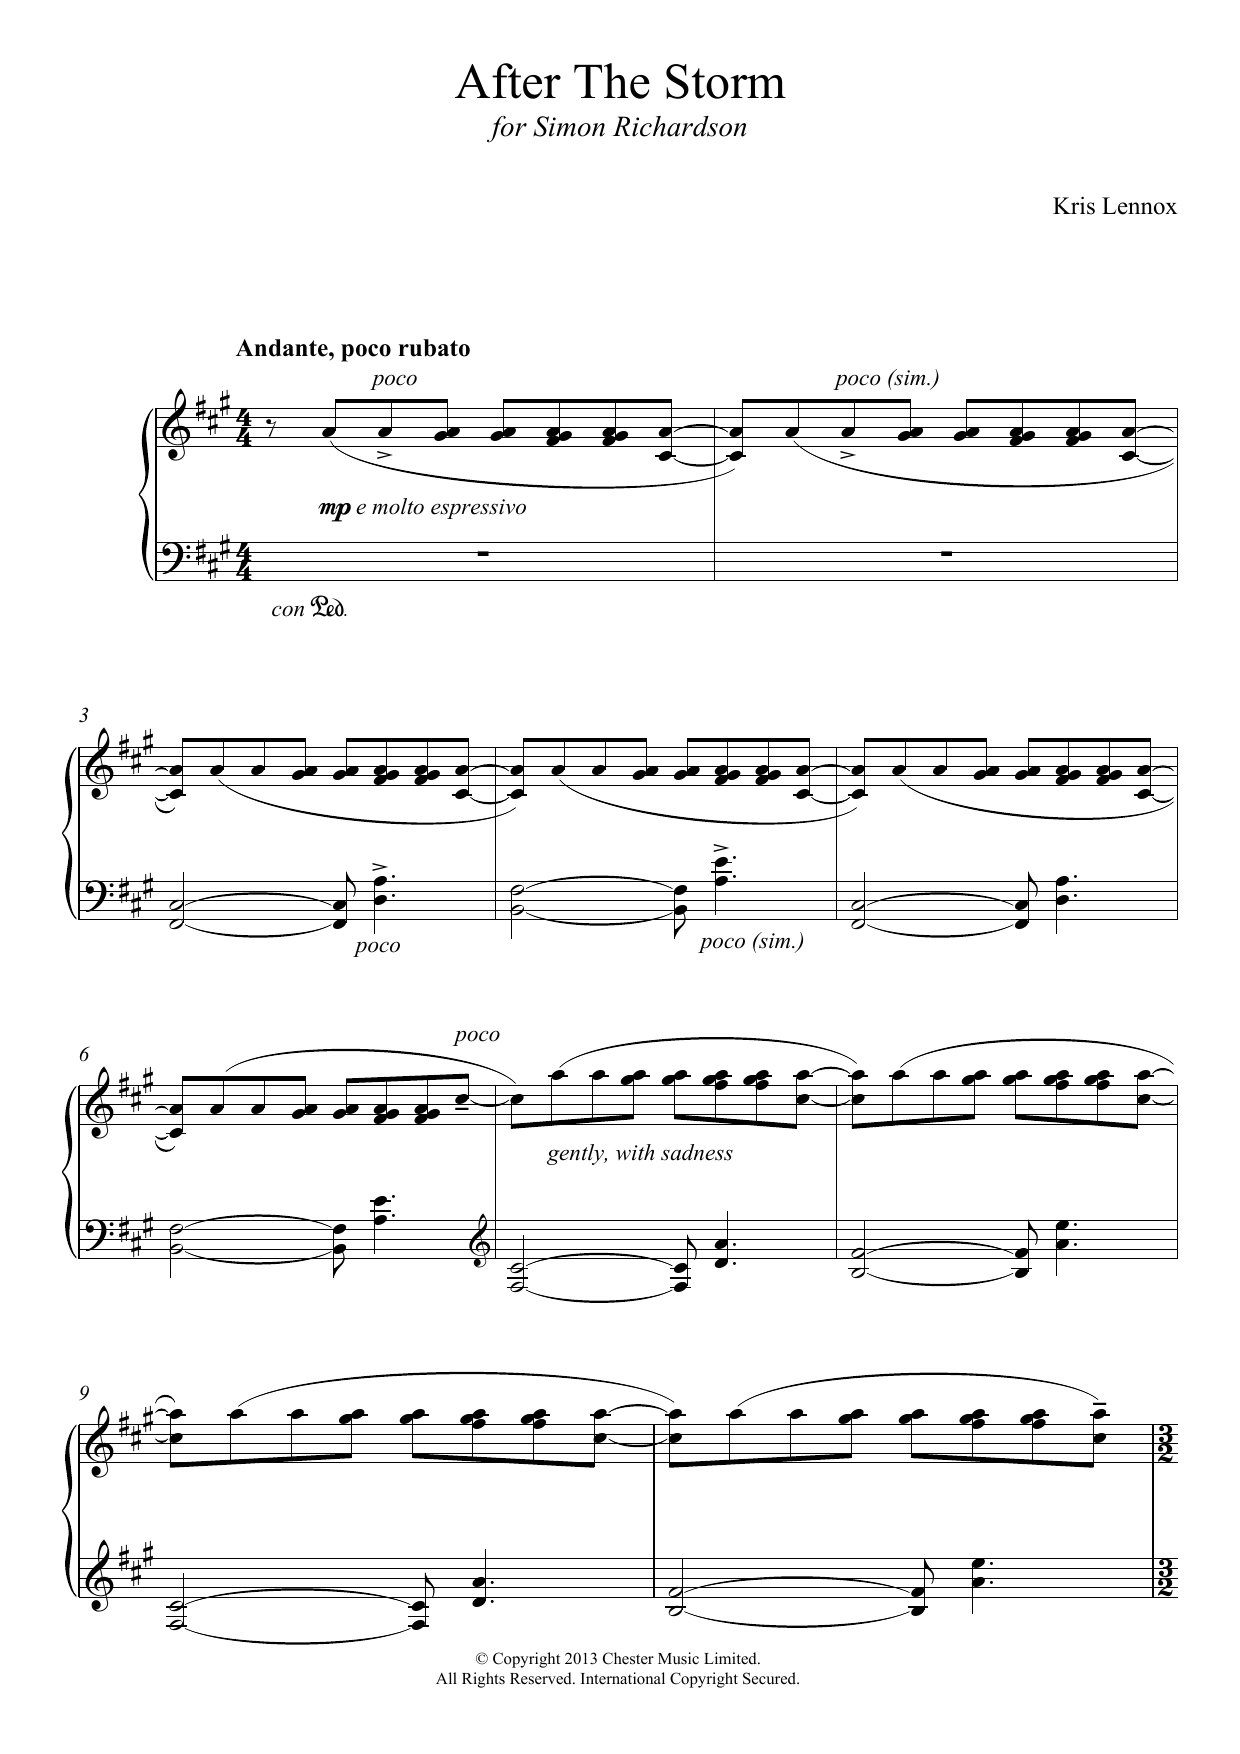 Download Kris Lennox After The Storm Sheet Music